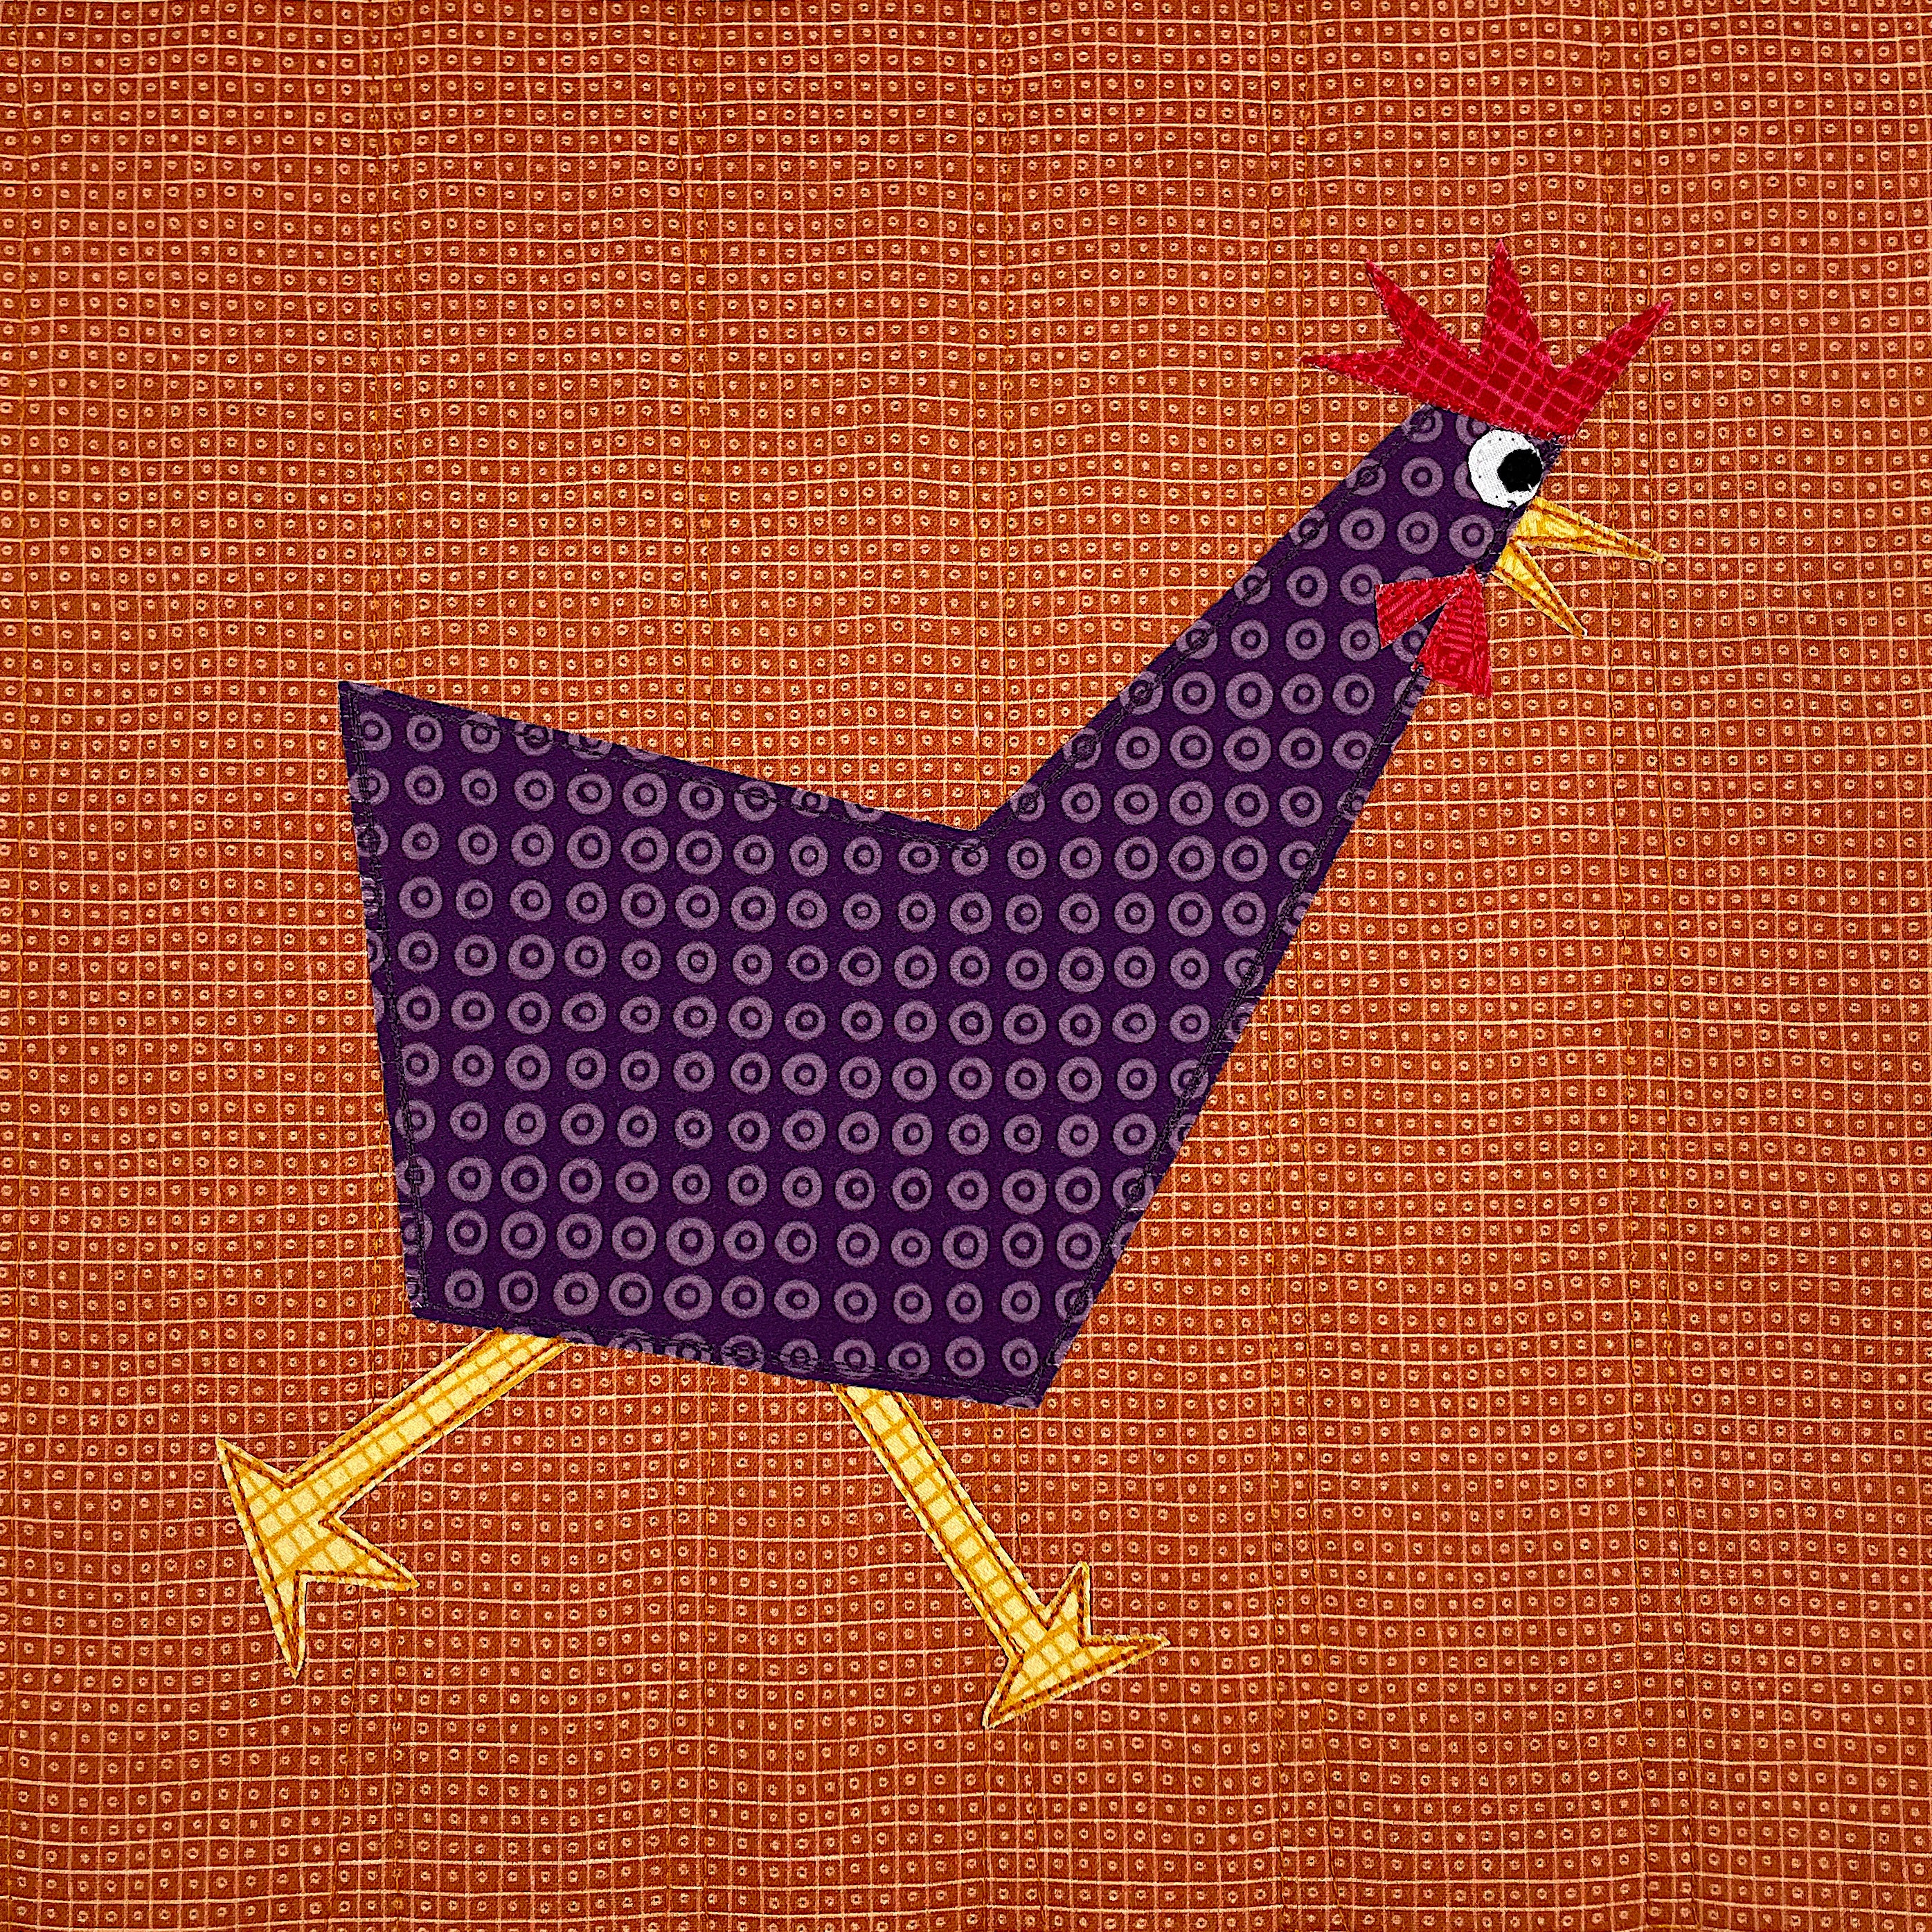 Silly Chickens - Mix & Match Applique Quilt Pattern